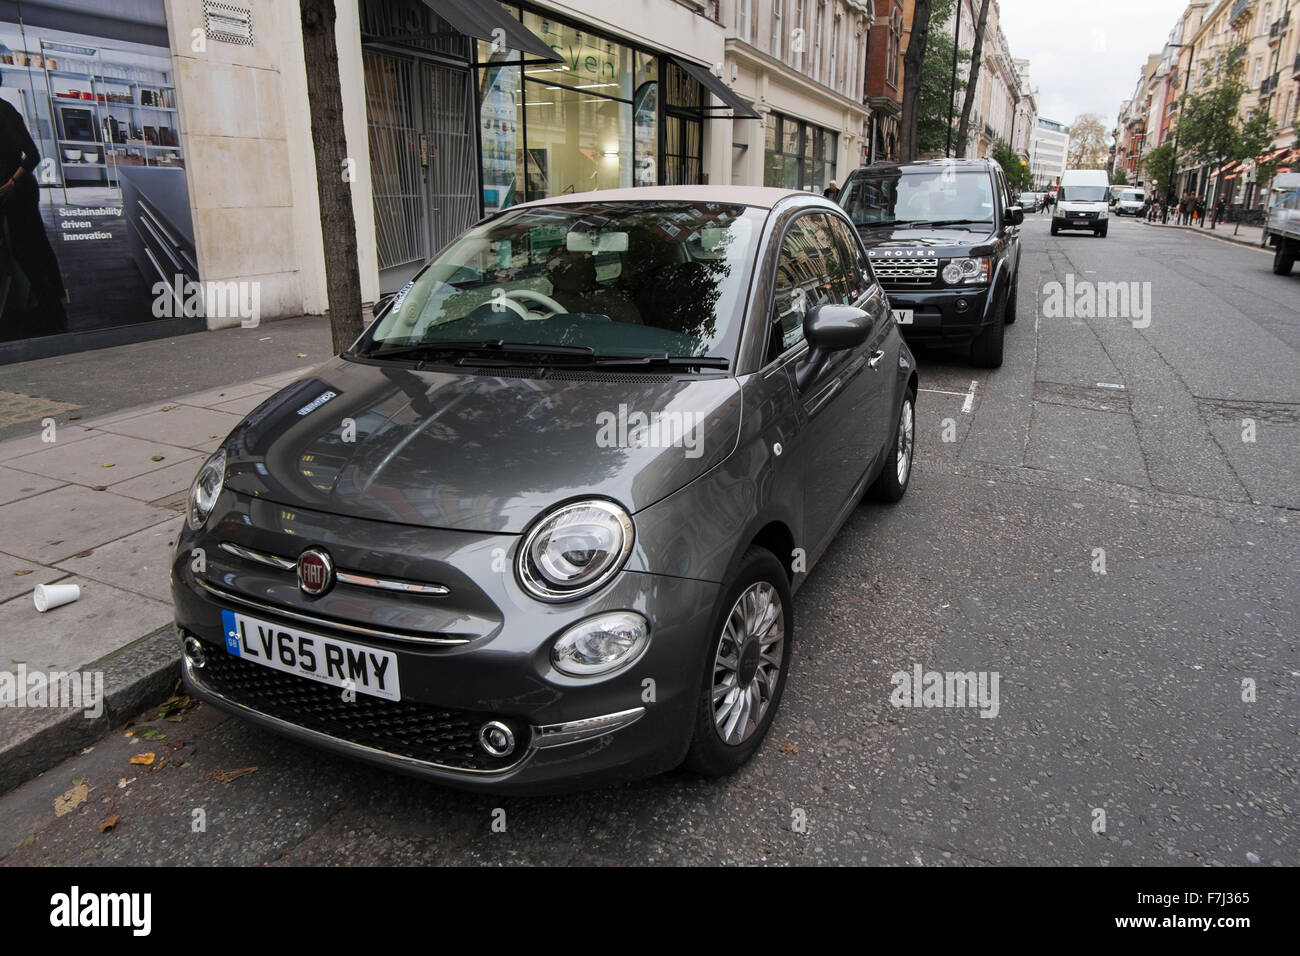 Graphite silver Fiat Cinquecento 500 parked in Great Portland Street in London, England, UK Stock Photo